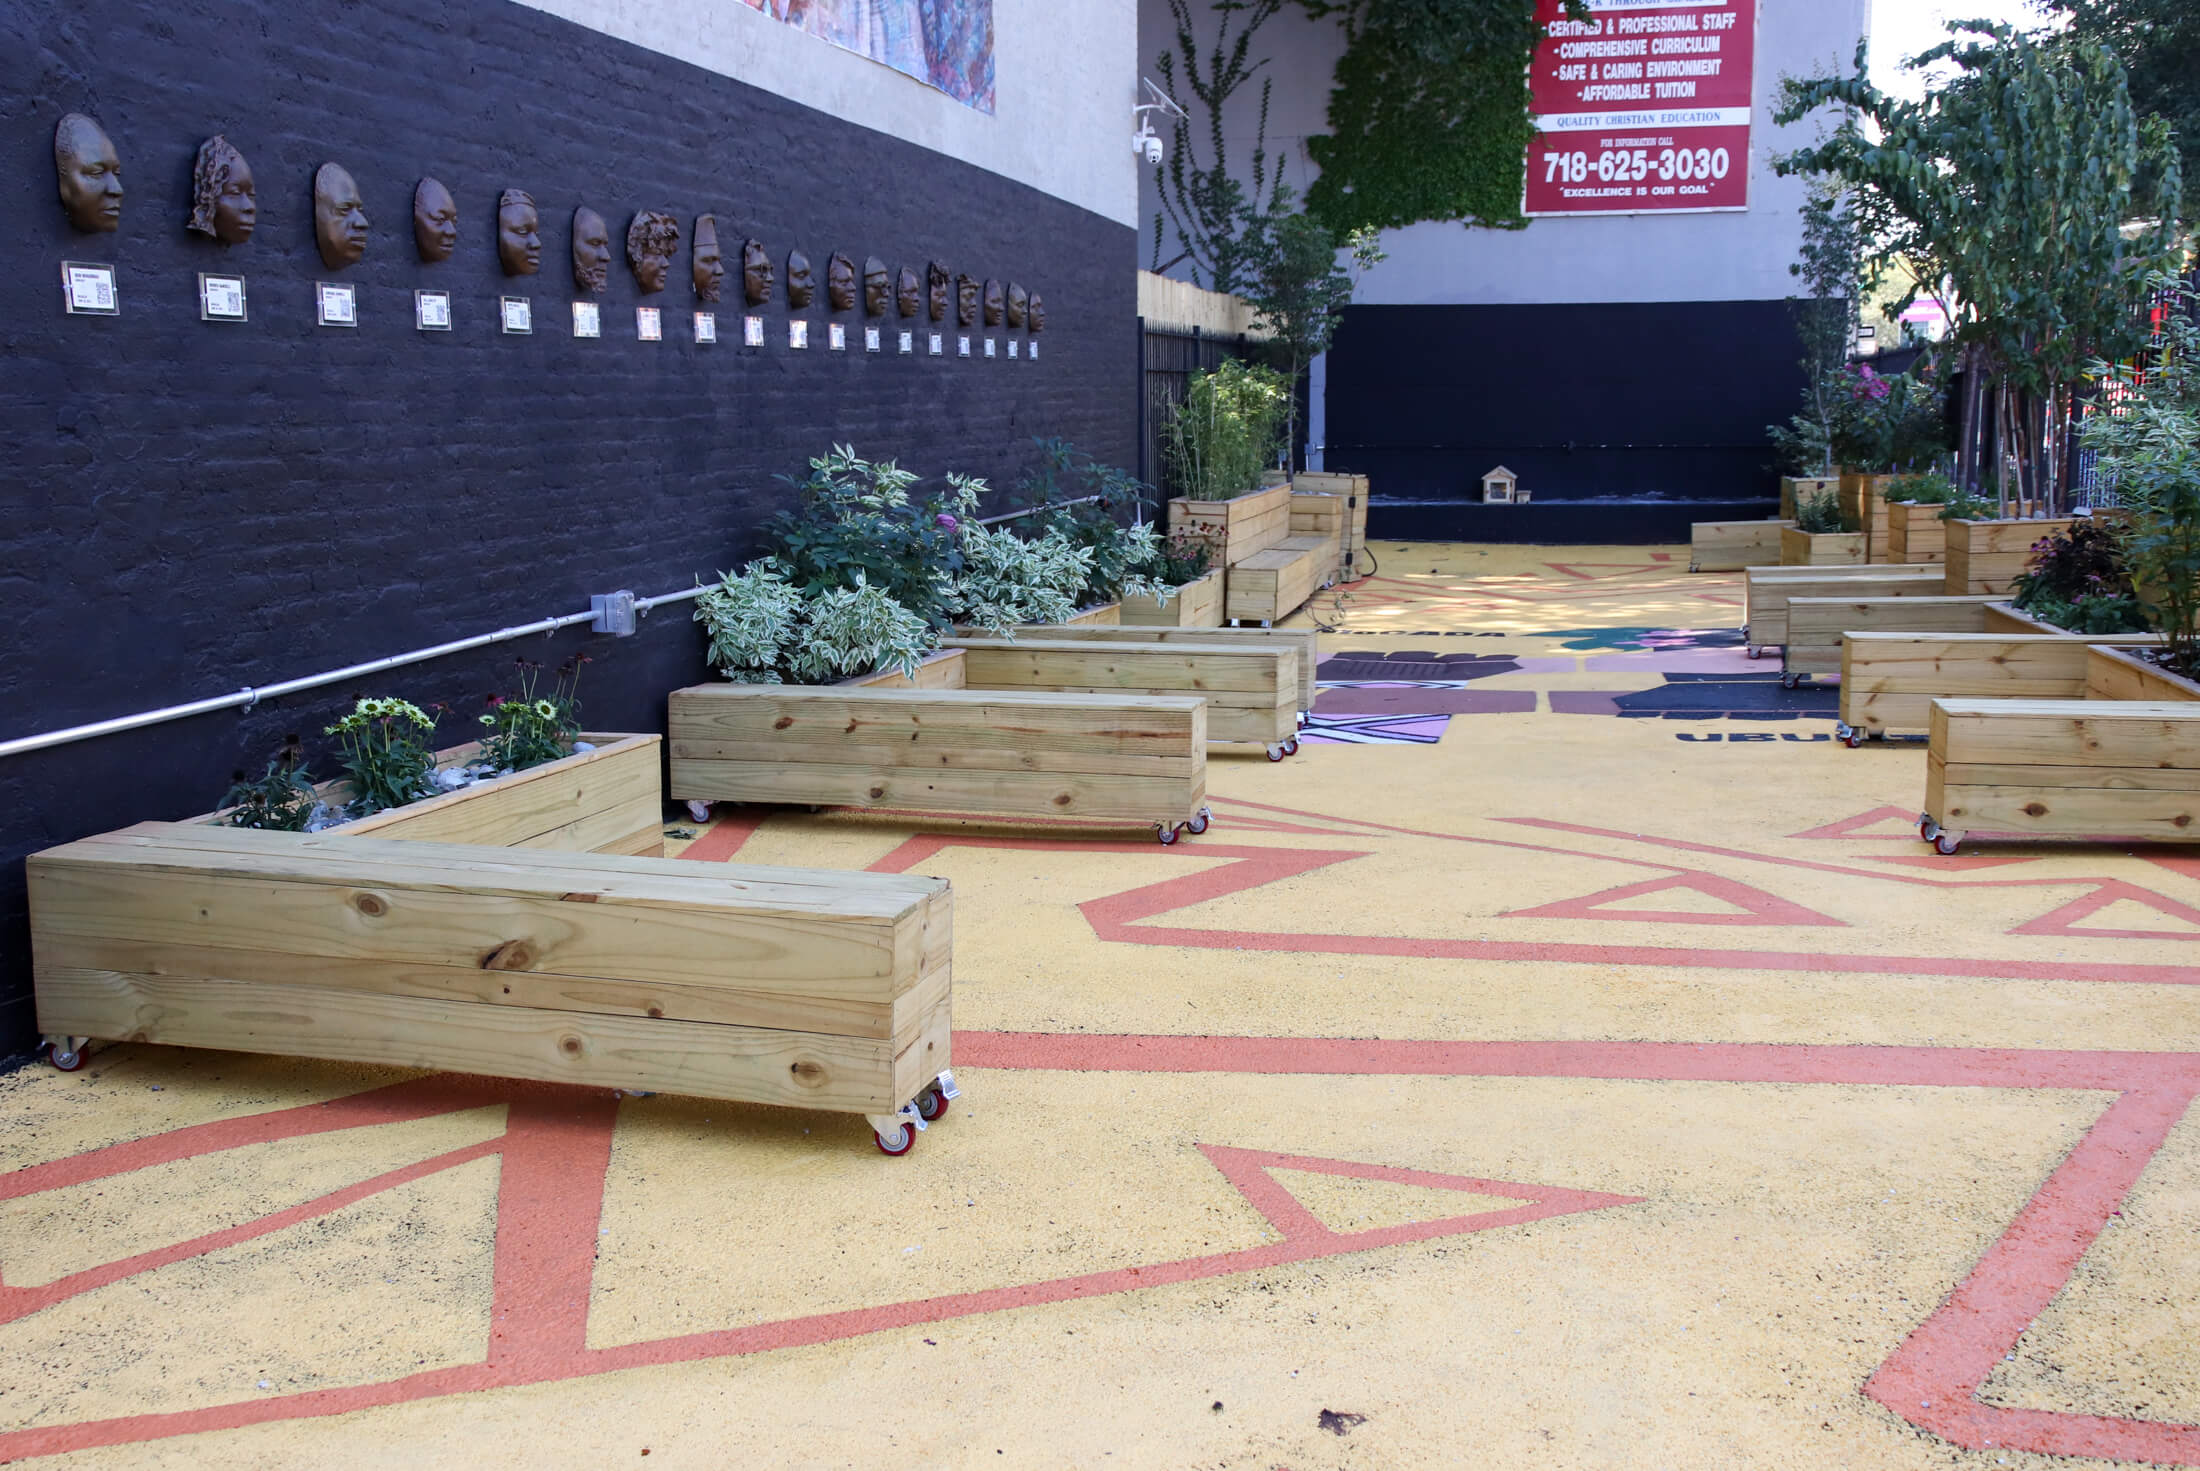 view of space with painted mural on ground and wood benches and planters